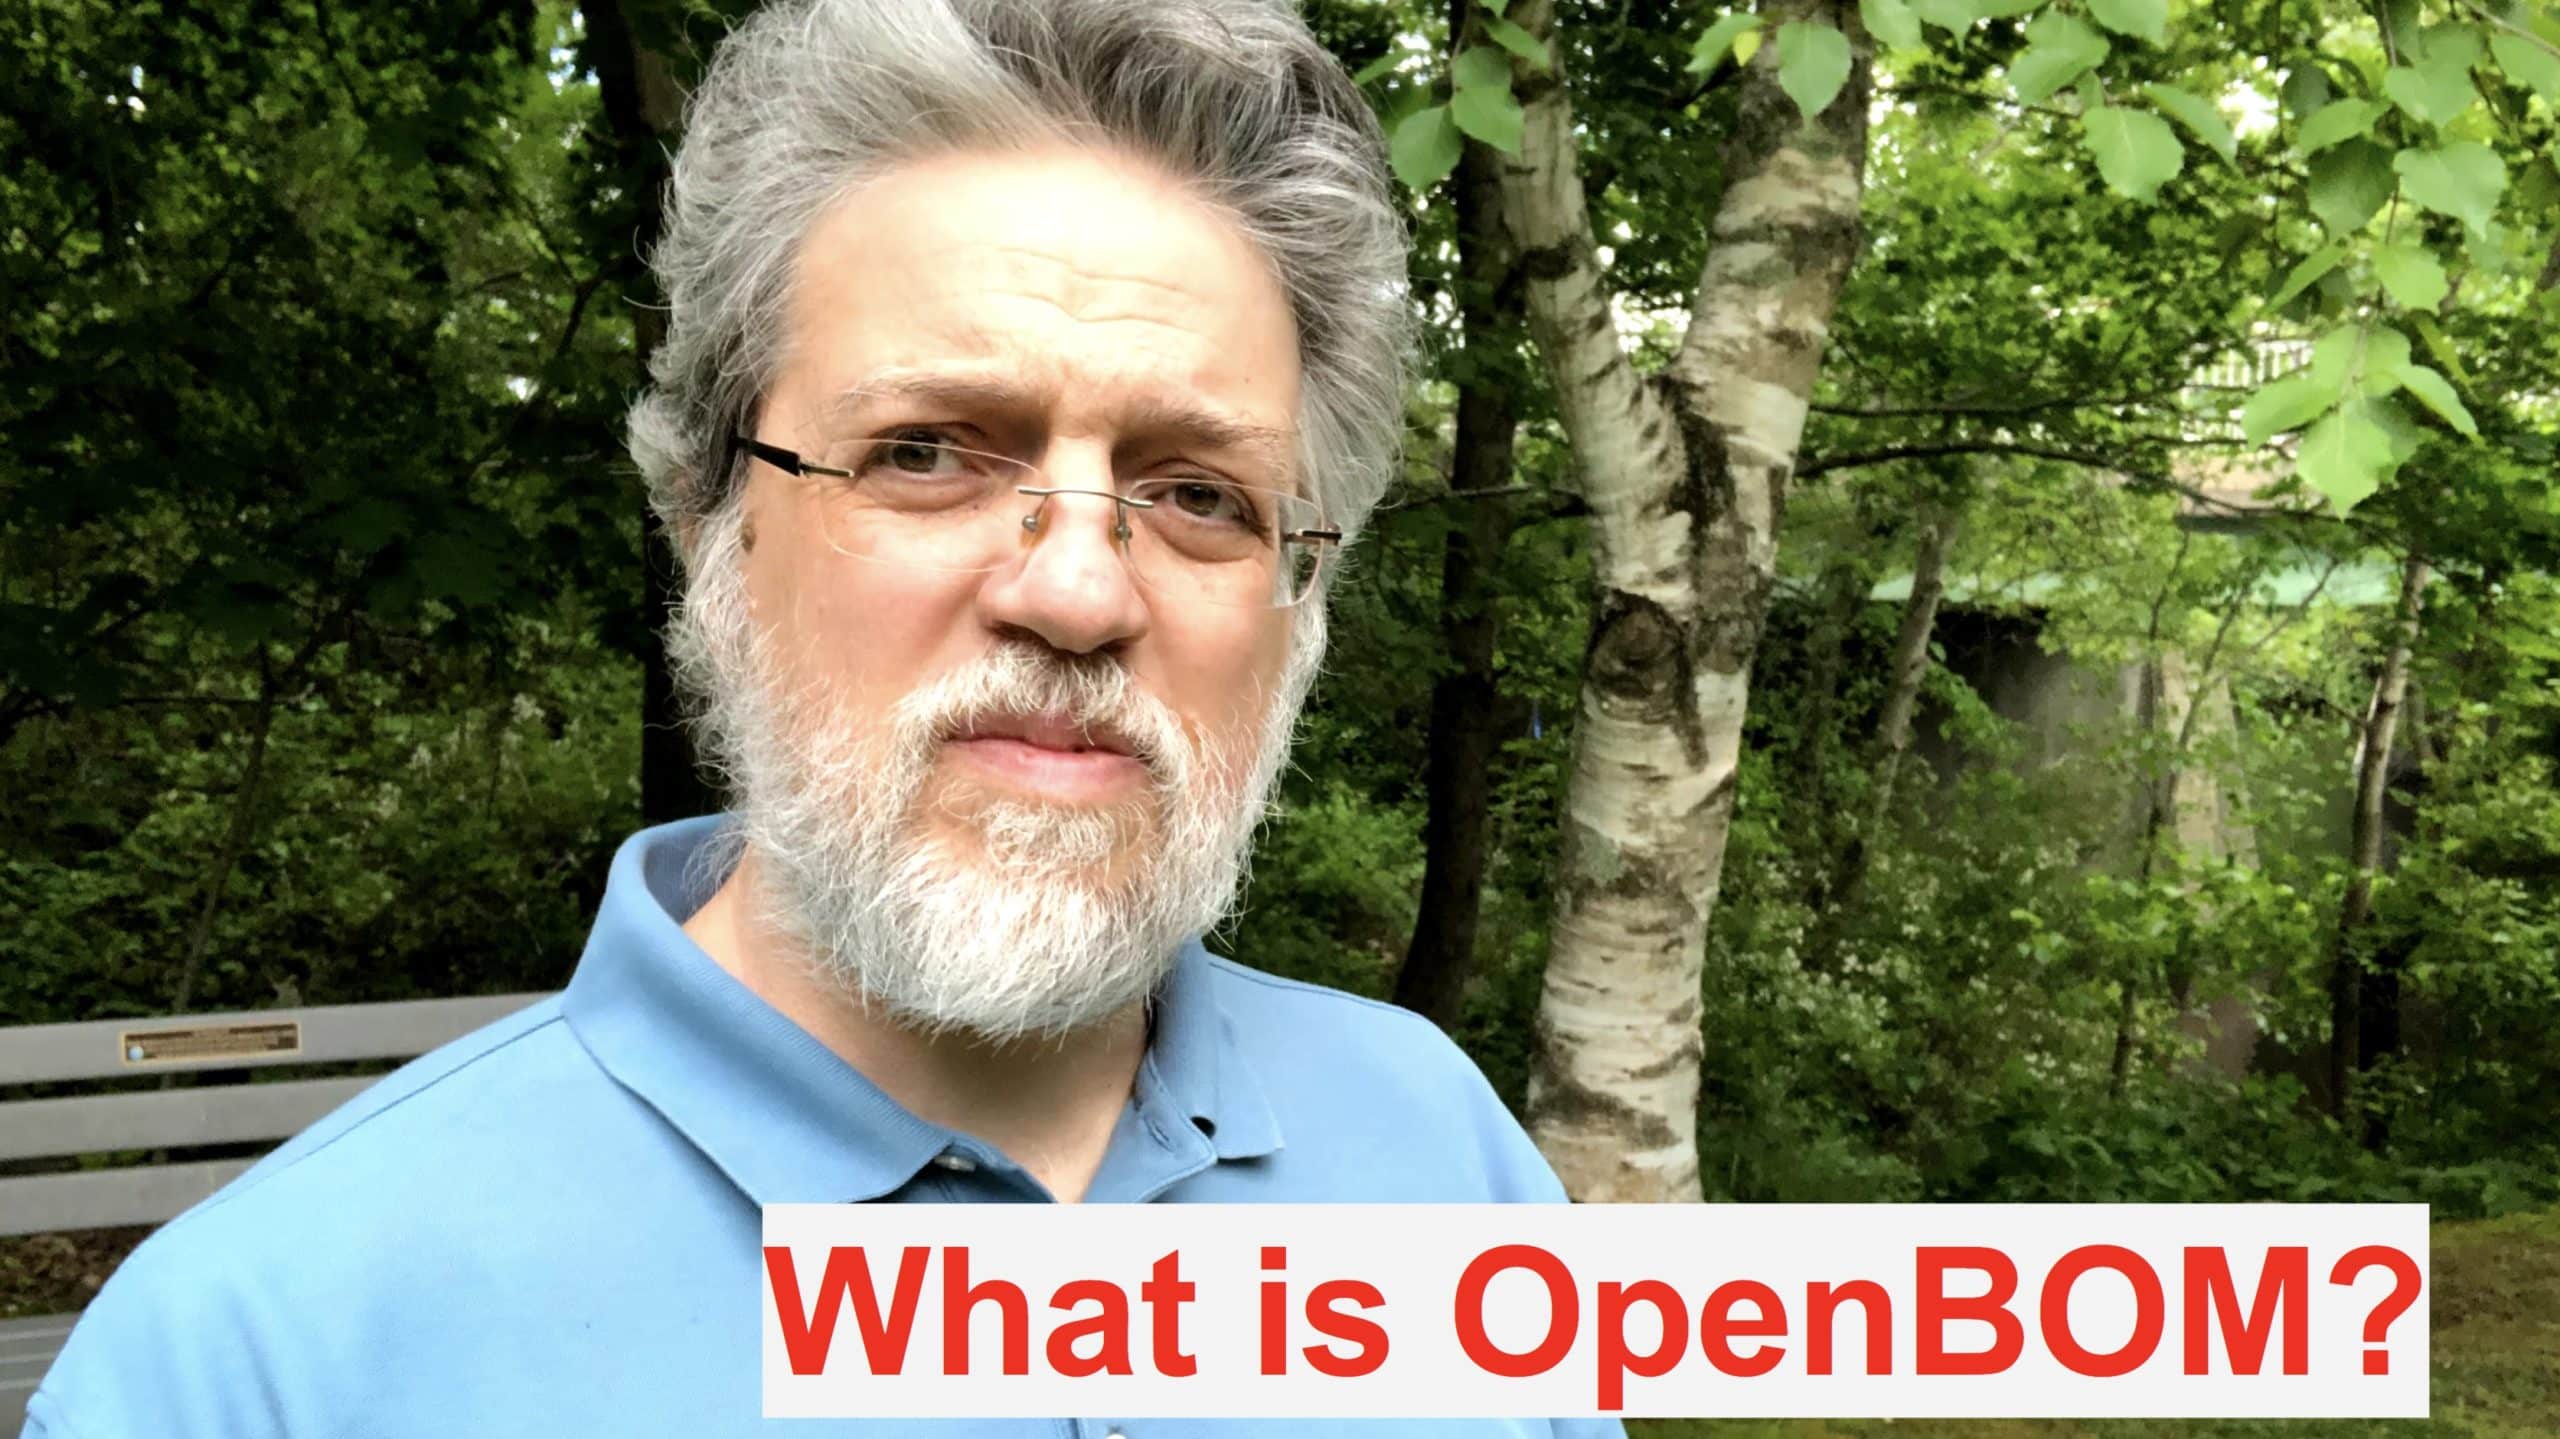 VIDEO: Why OpenBOM? Learn 5 things about how OpenBOM can help you